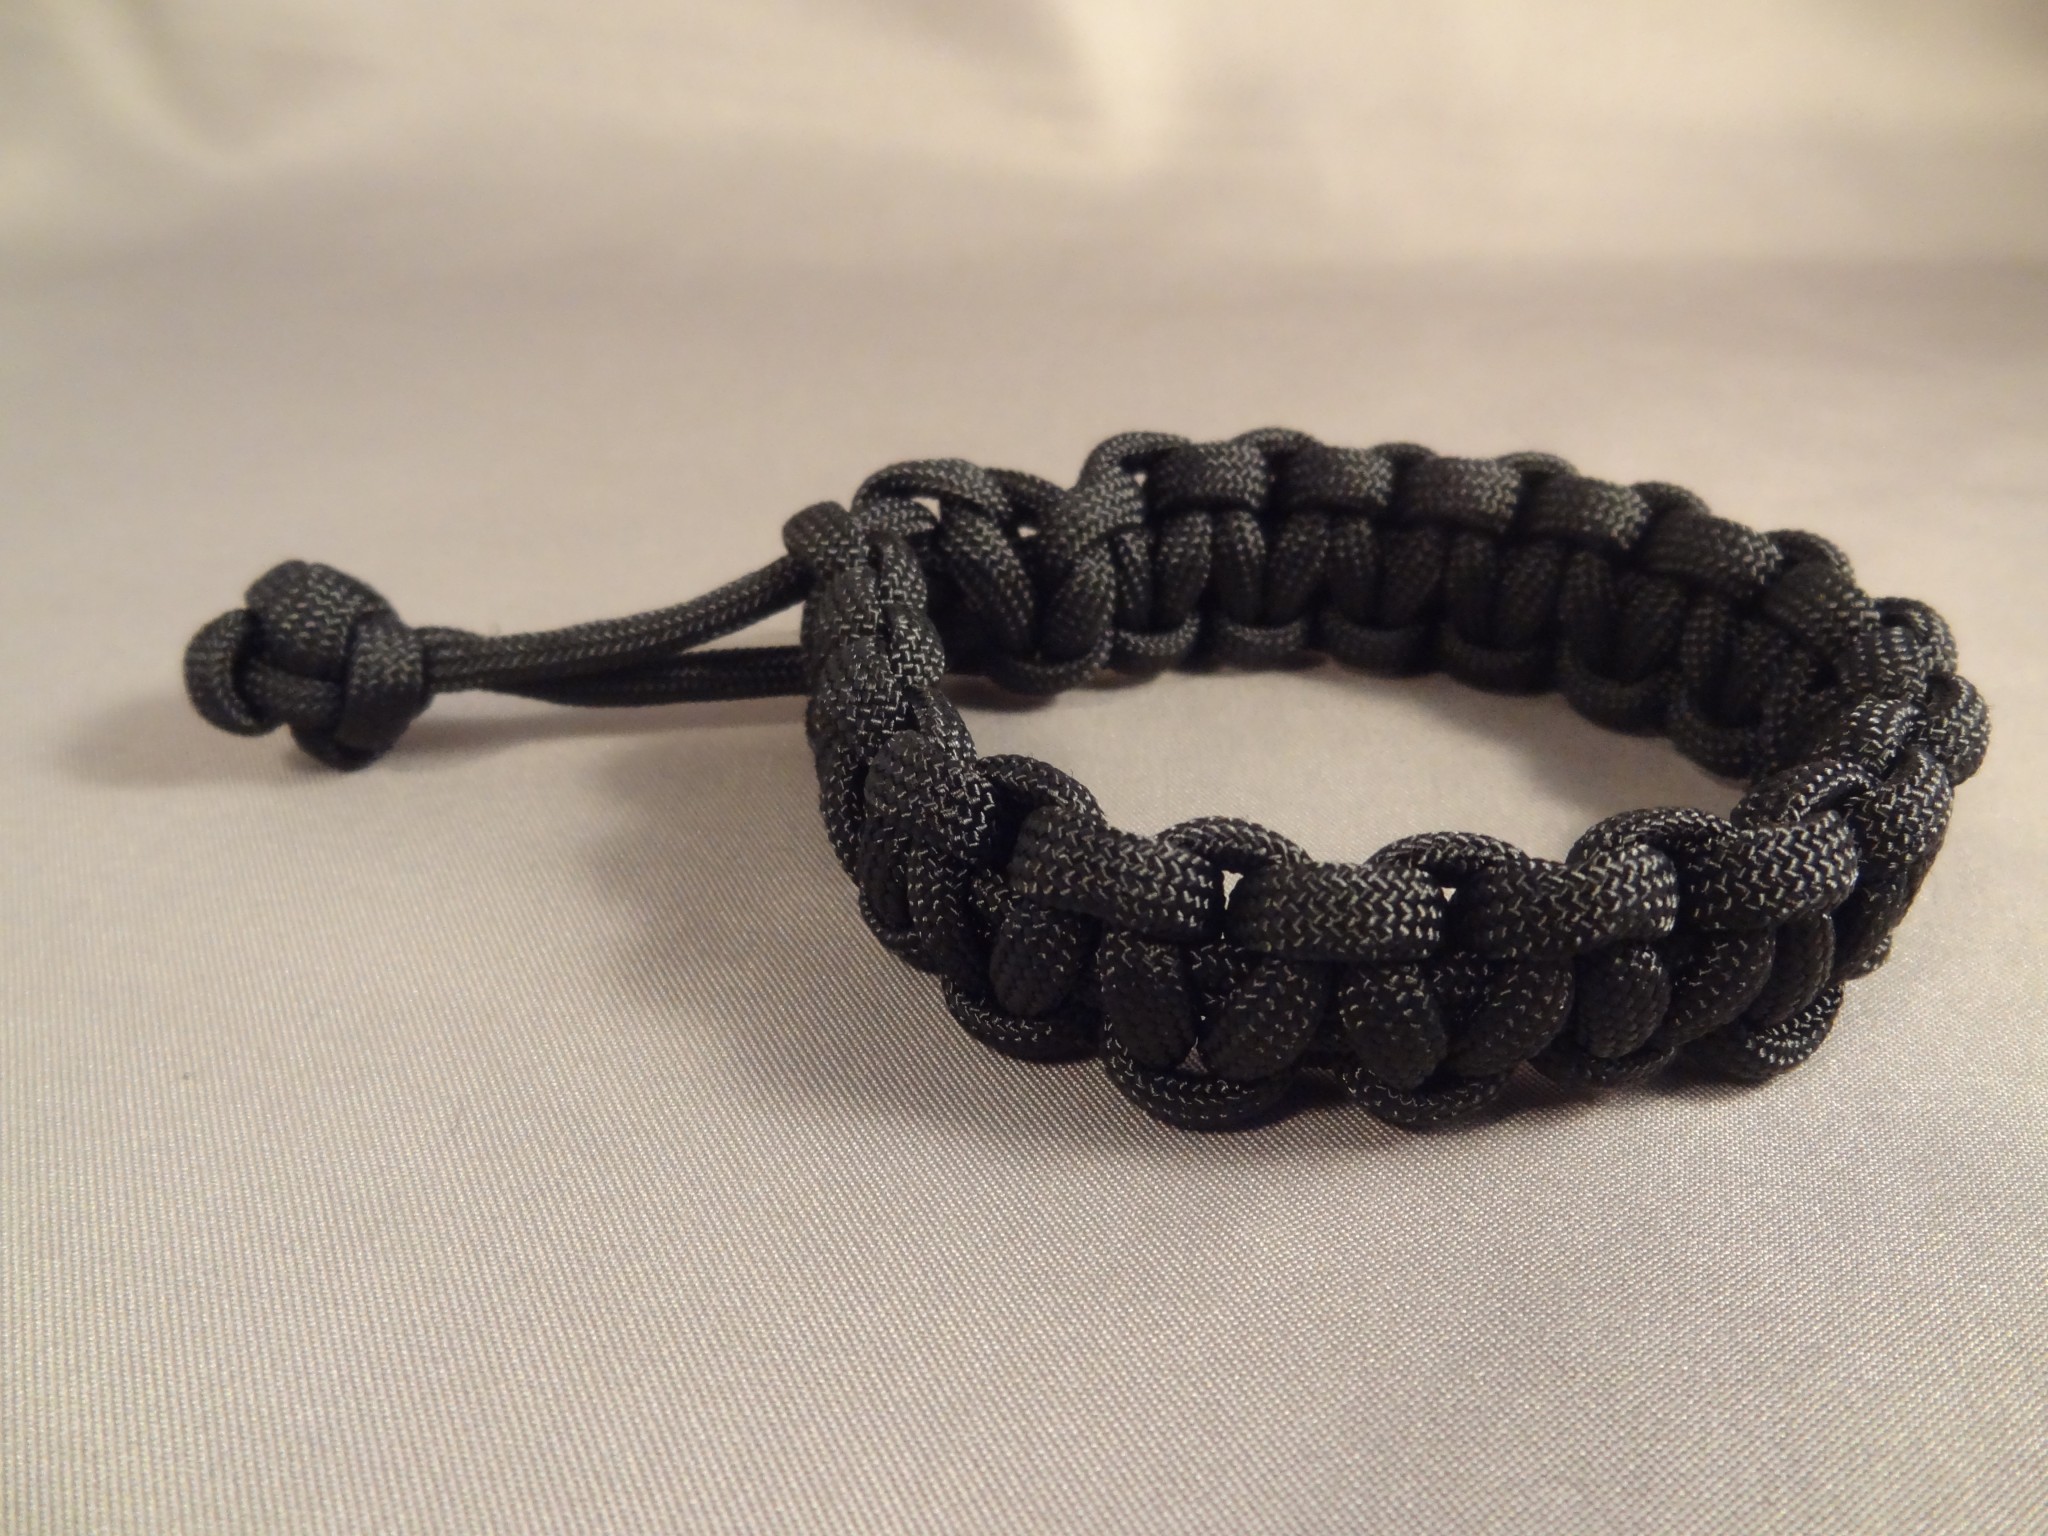 Mad Max Inspired Adjustable Paracord Survival Bracelet Many Colors 